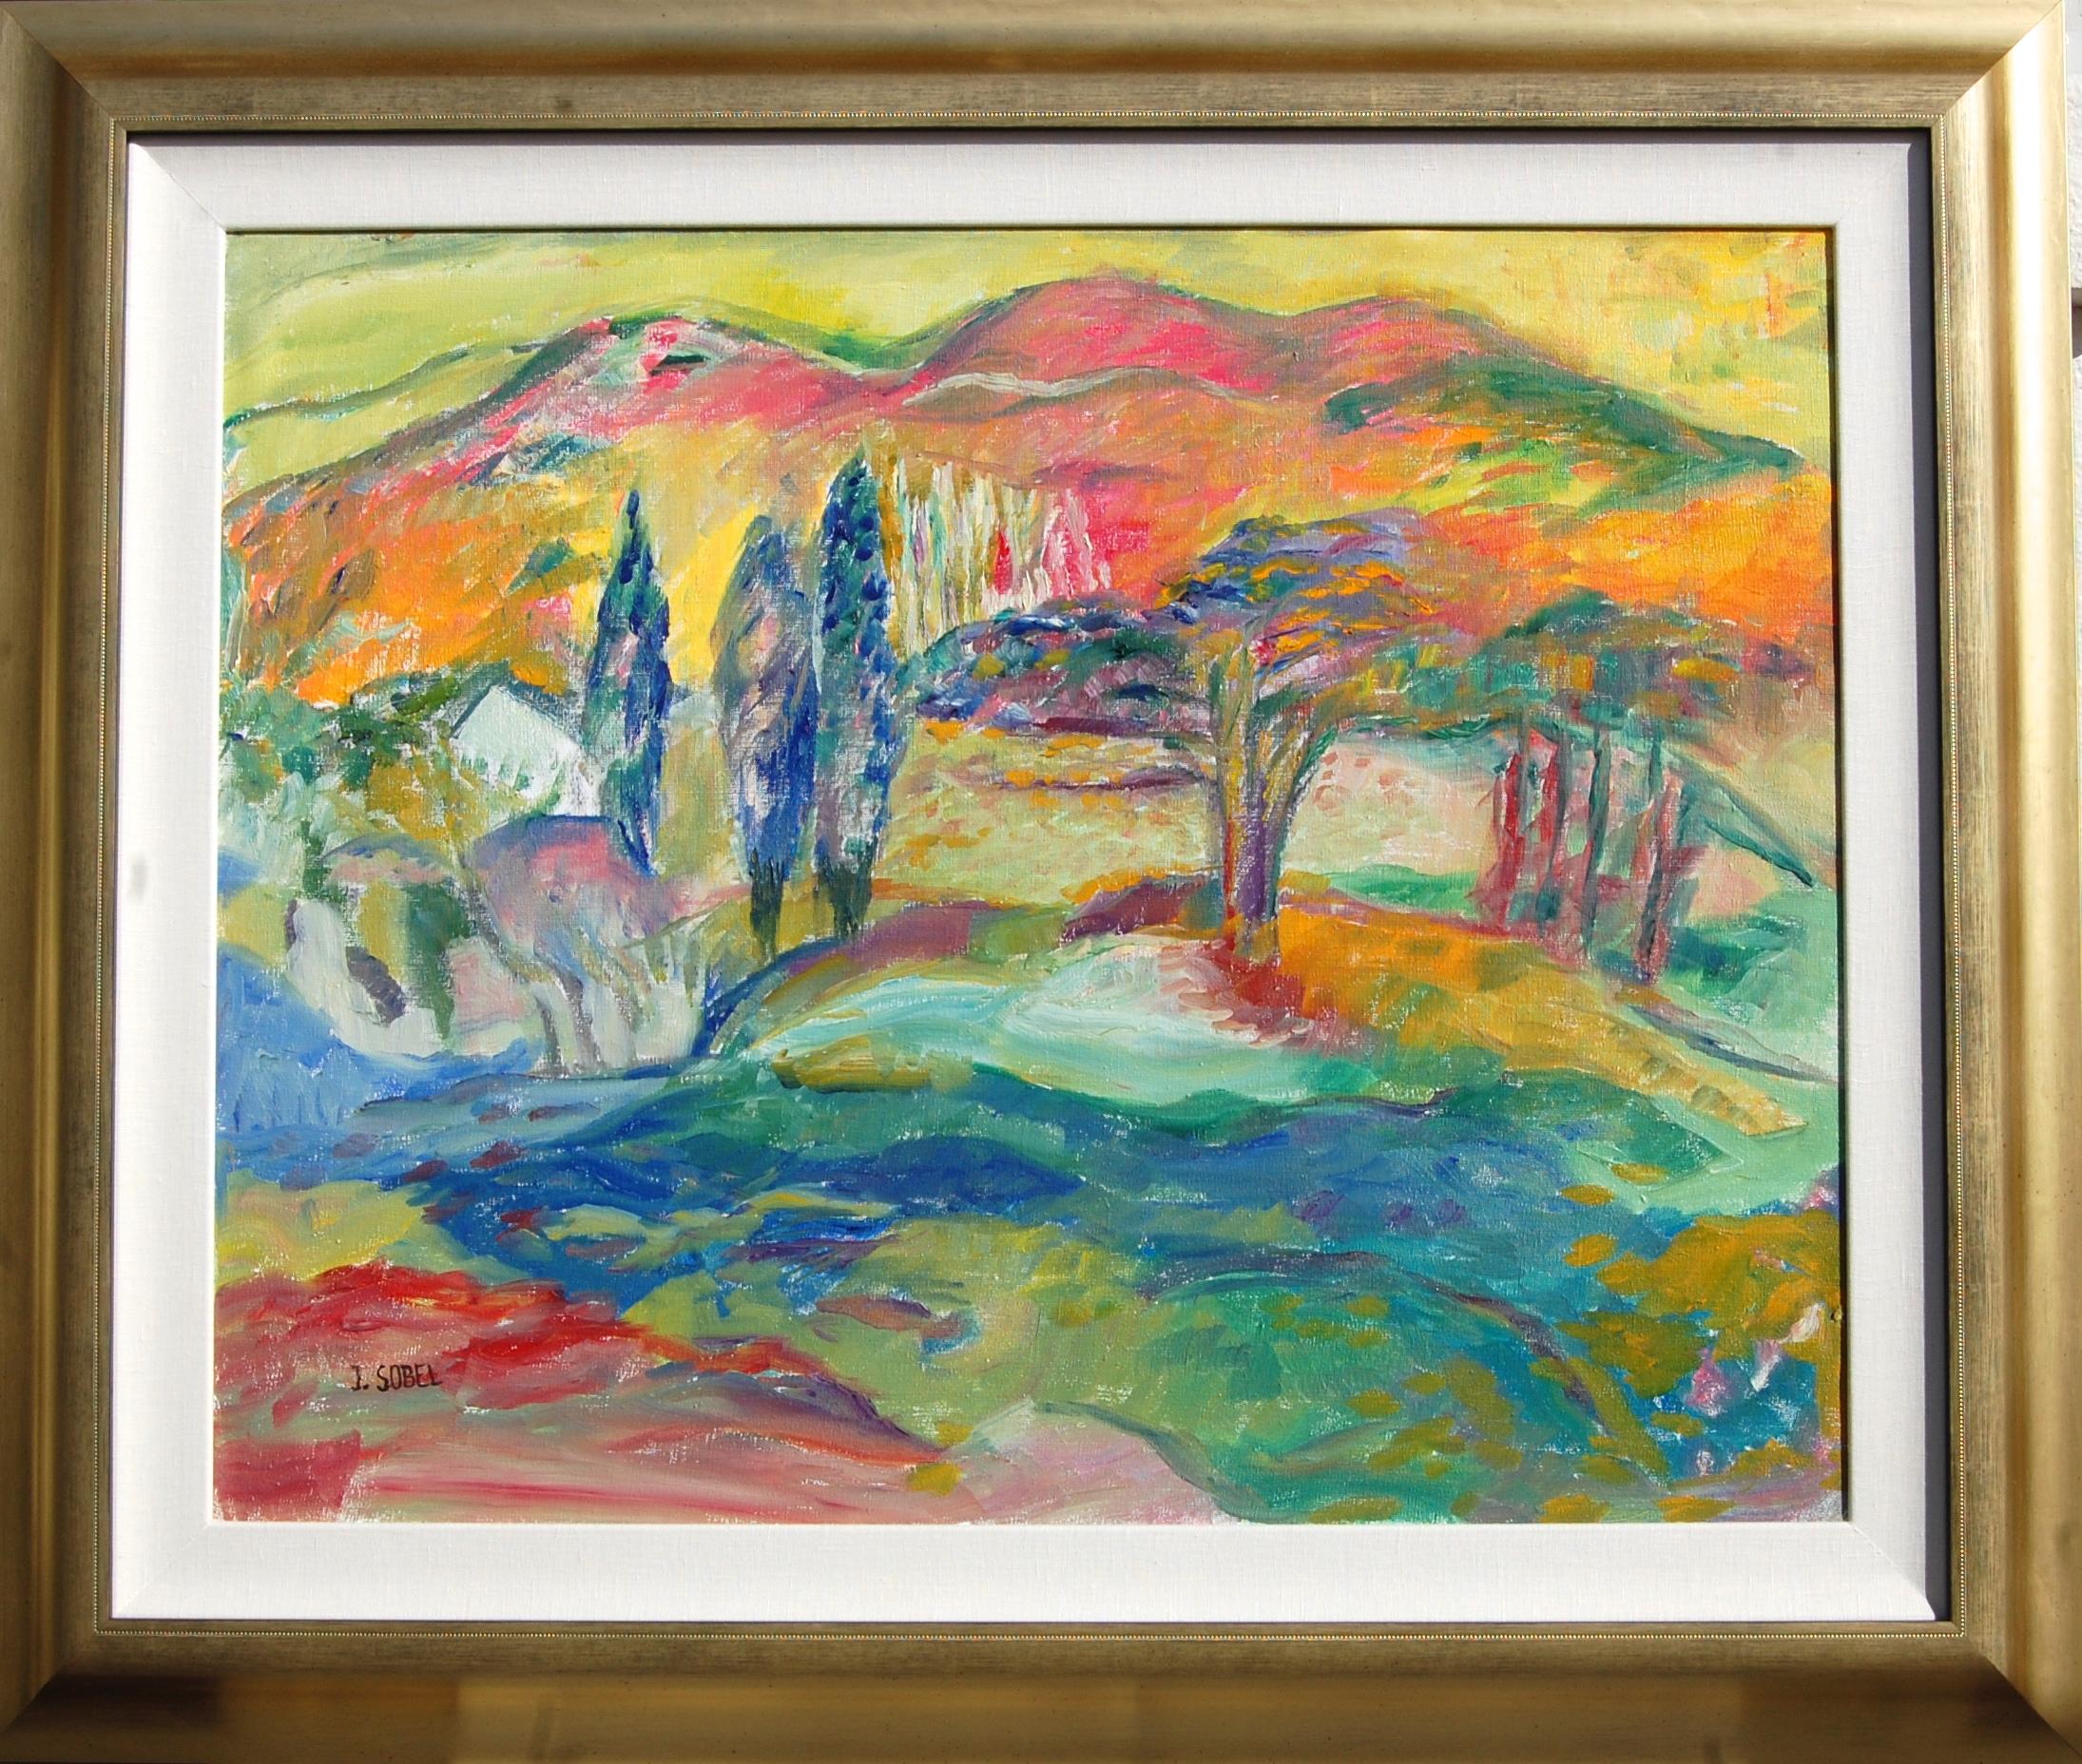 Vibrant Landscape With Mountain View - Impressionist Painting by Jehudith Sobel